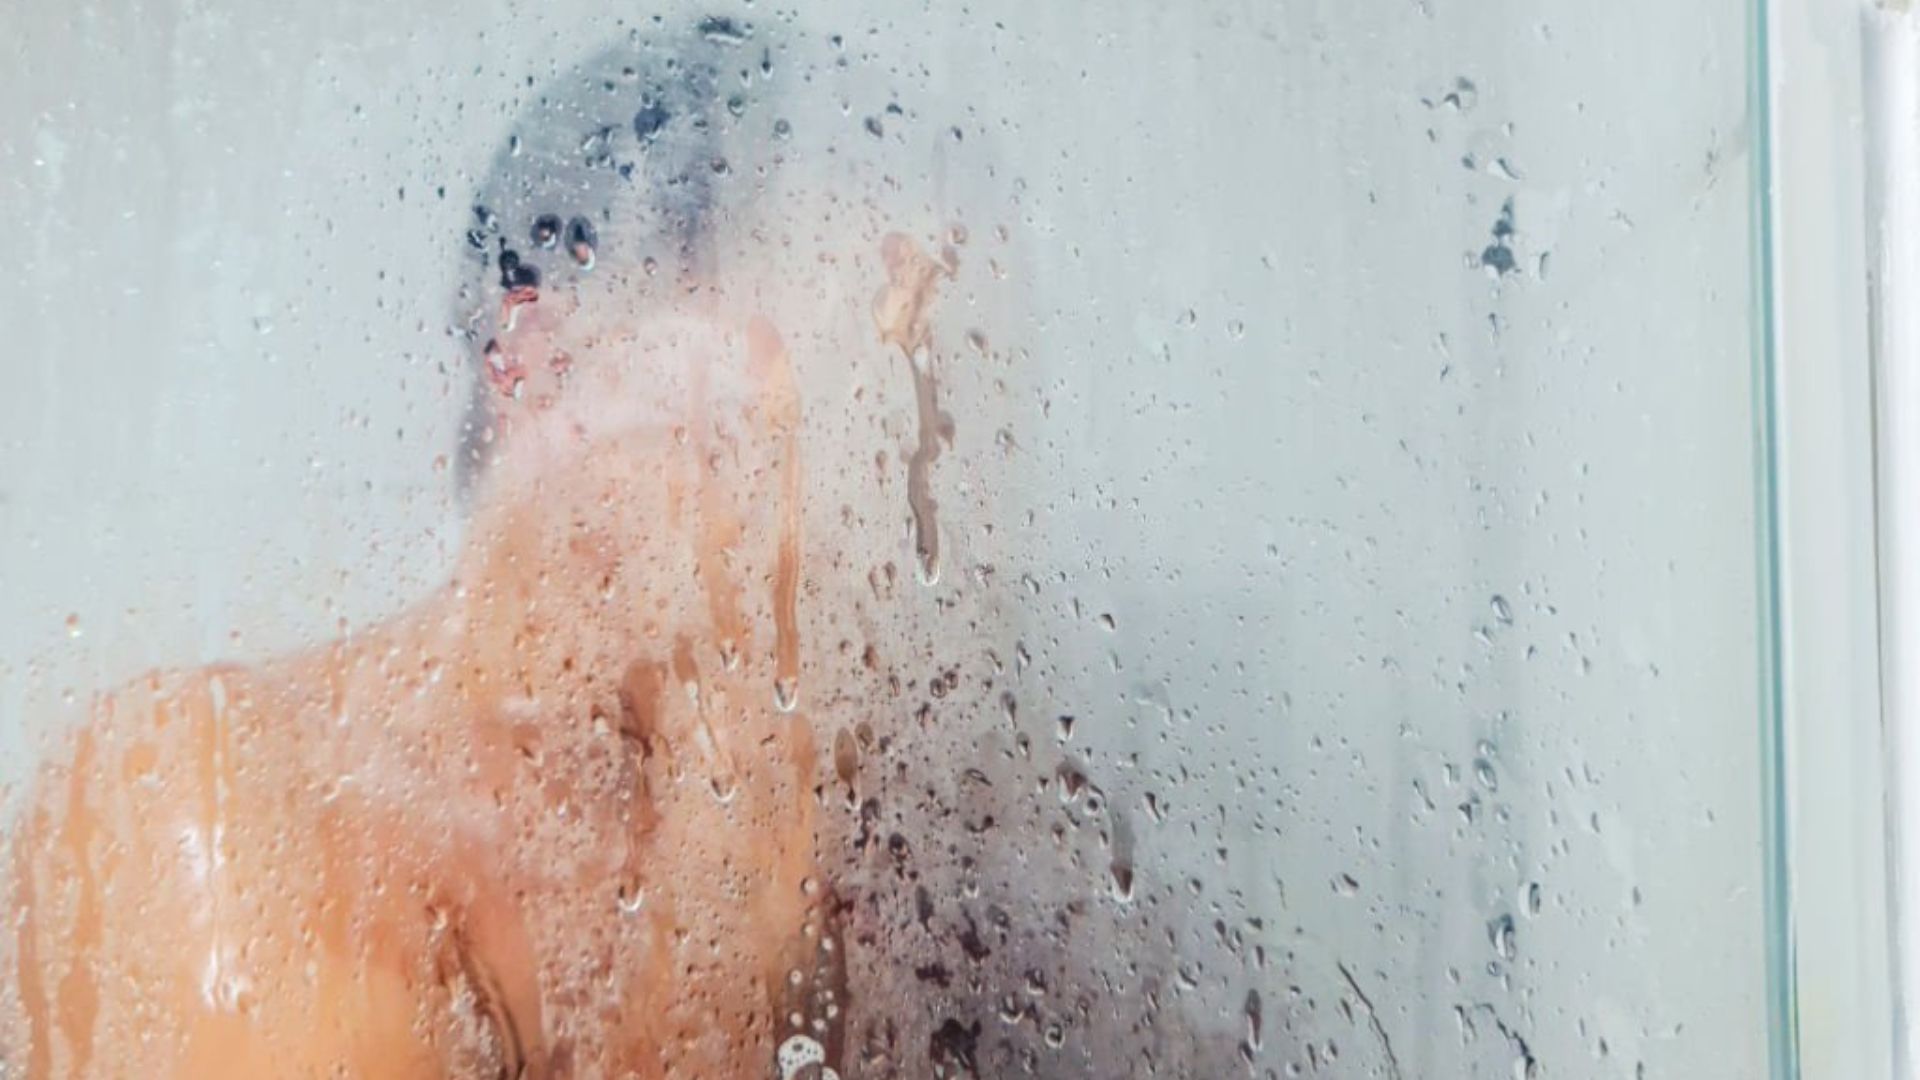 Hot Shower Vs Cool Shower Muscle, Skin, Mental, Weight Loss & Immune System Effects